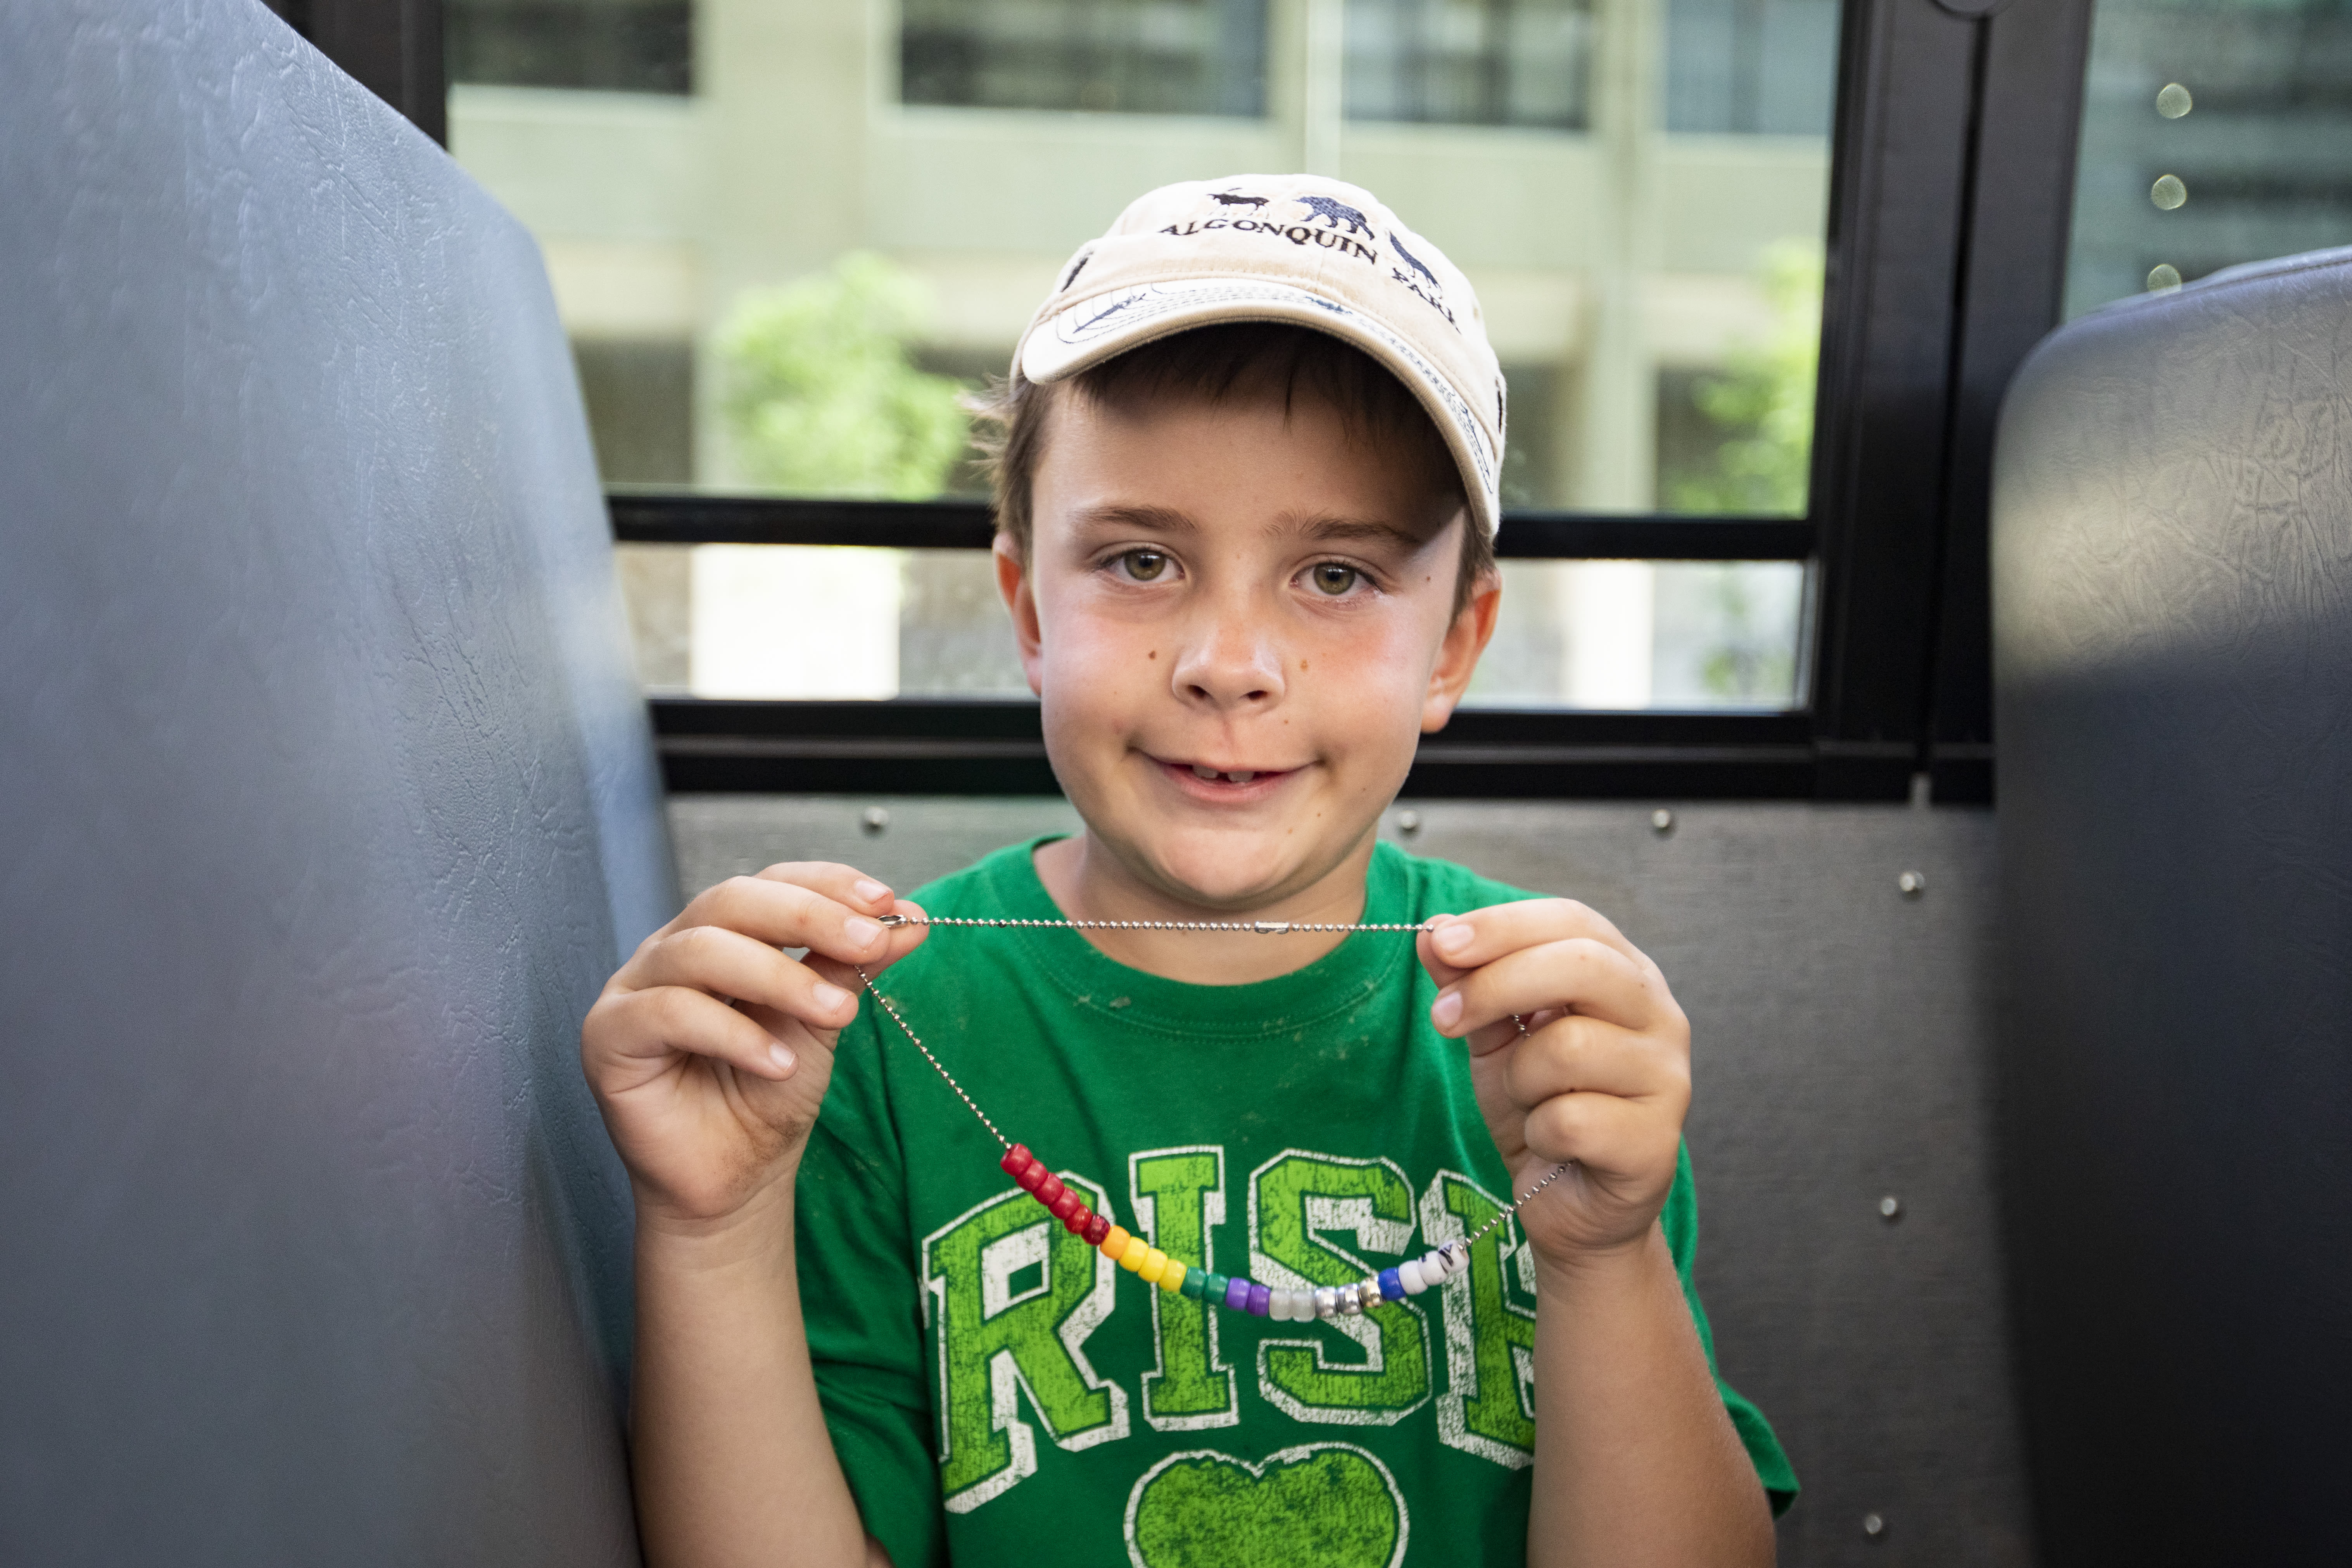 A camper is in a bus and is showing off their Value Beads.